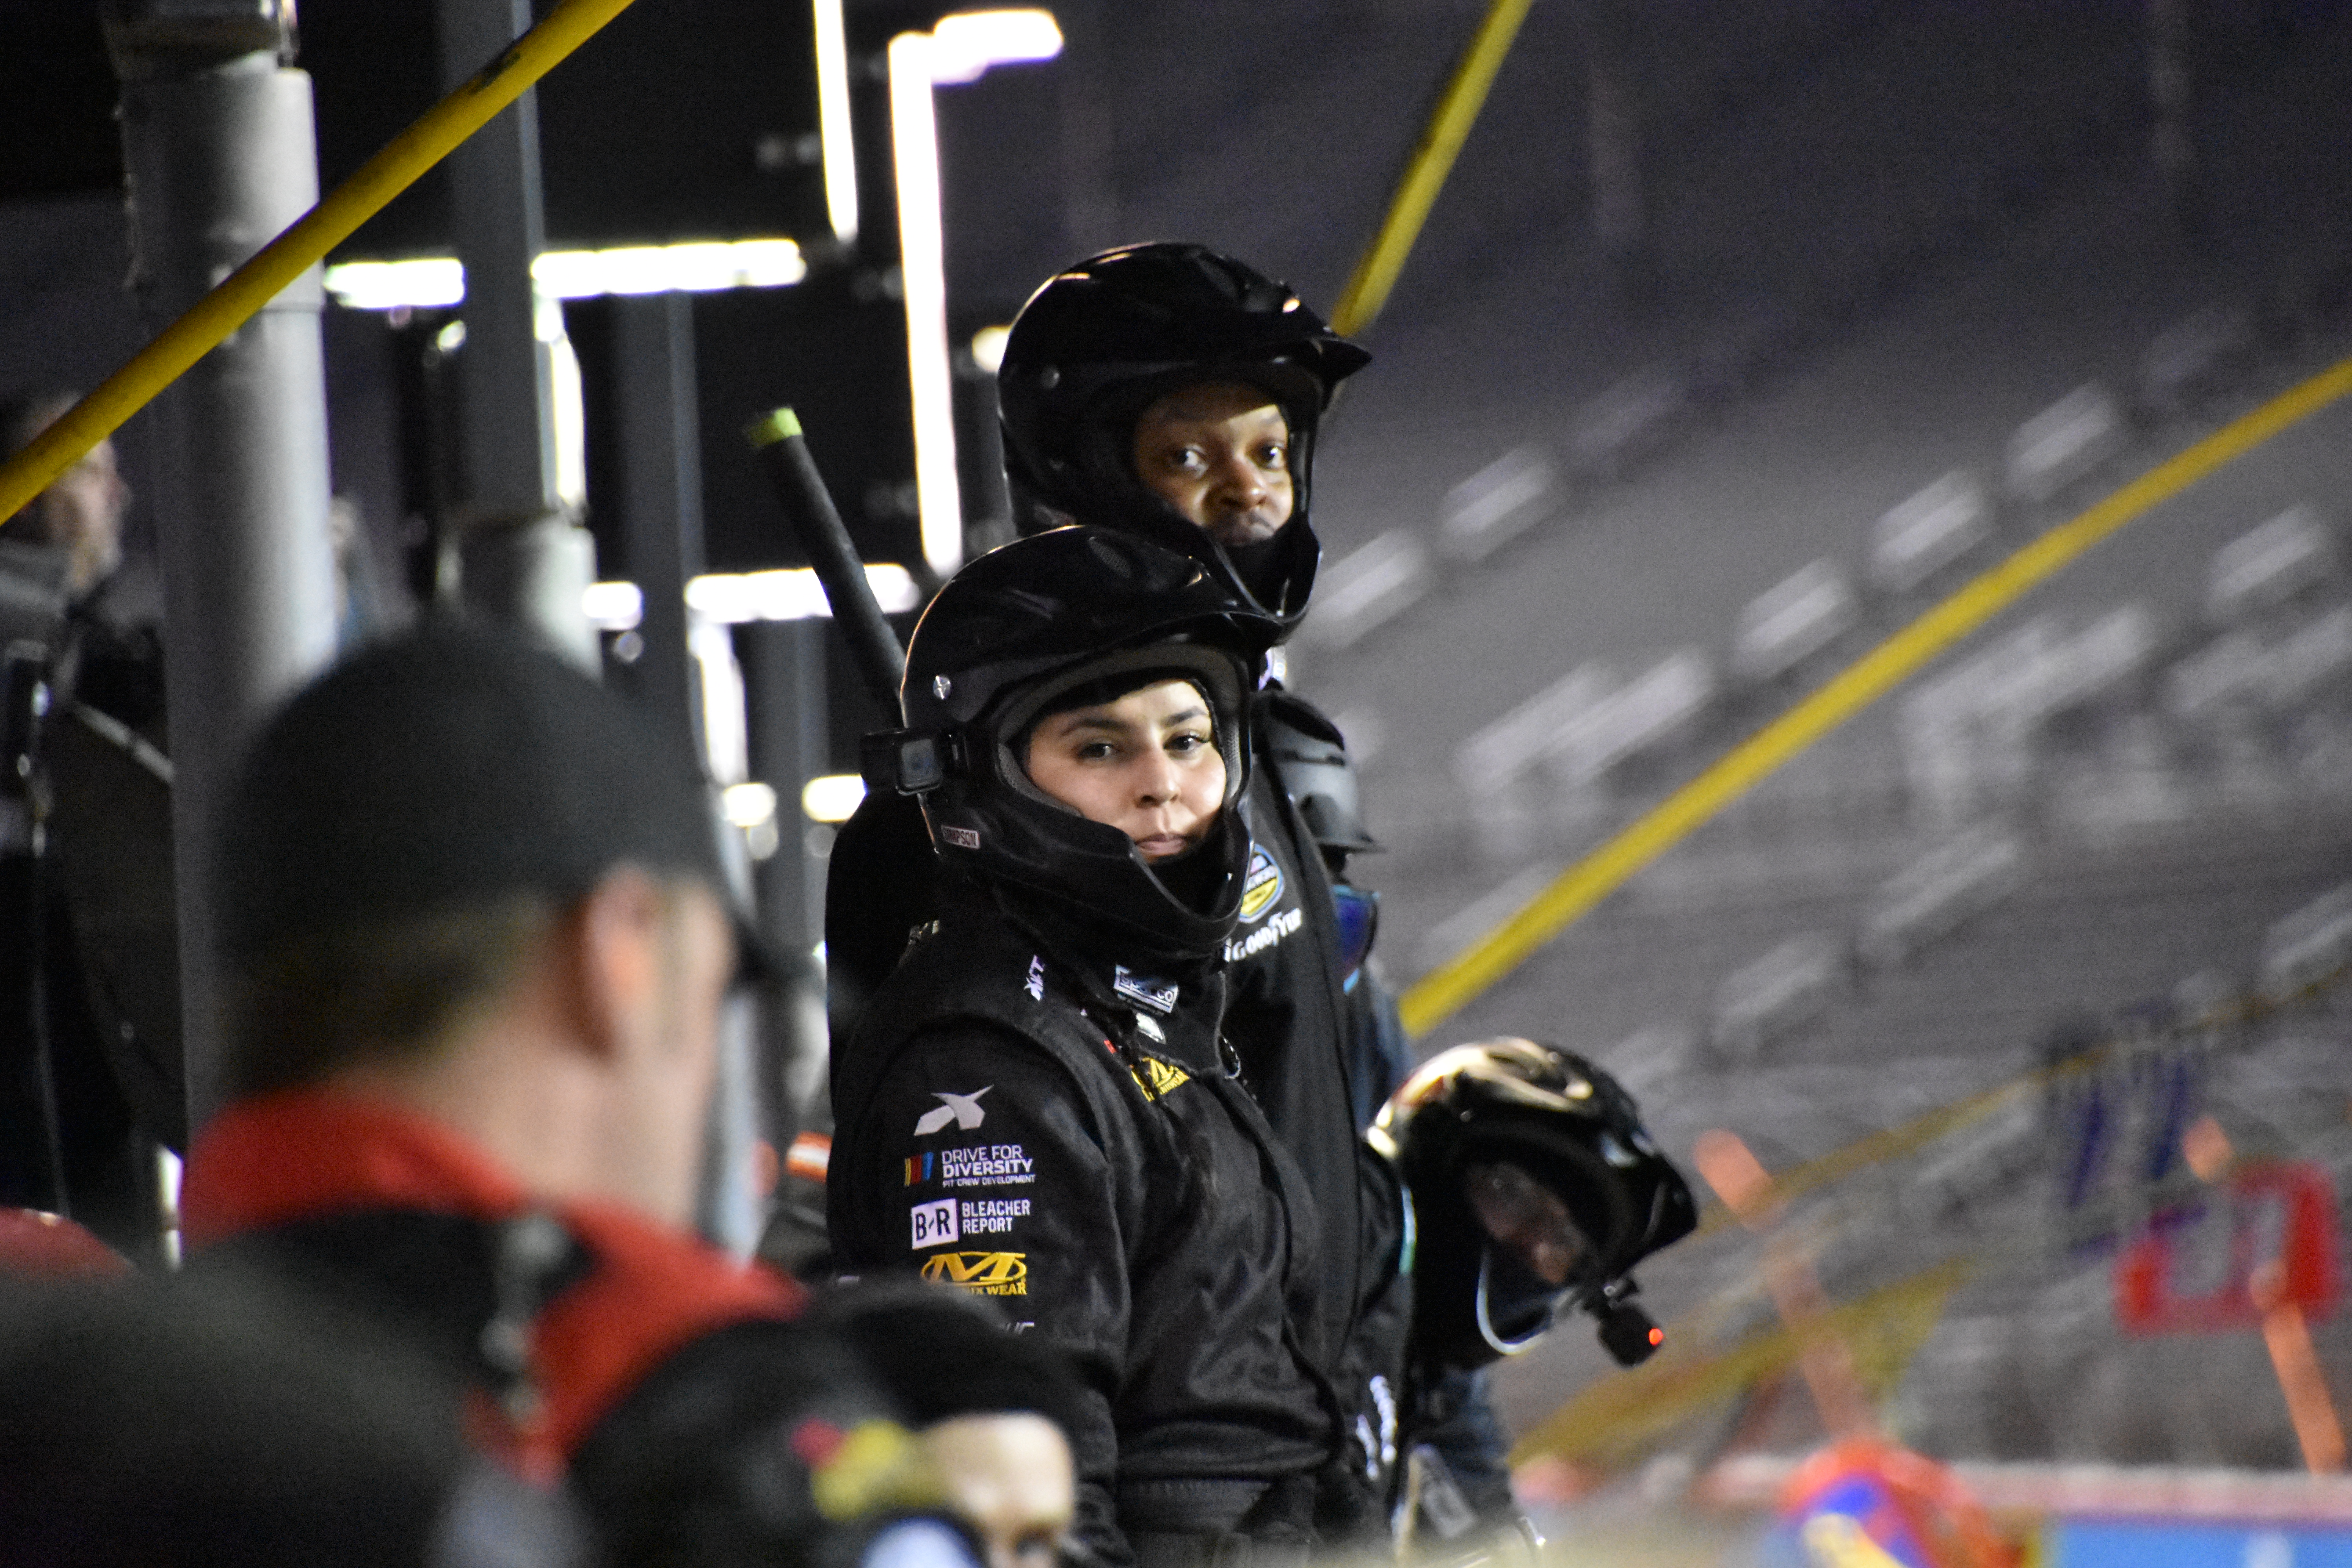 Altogether, Breanna O'Leary keeps focused with each pit stop, be it in practice or in a race. (Photo Credit: Sean Folsom/TPF)